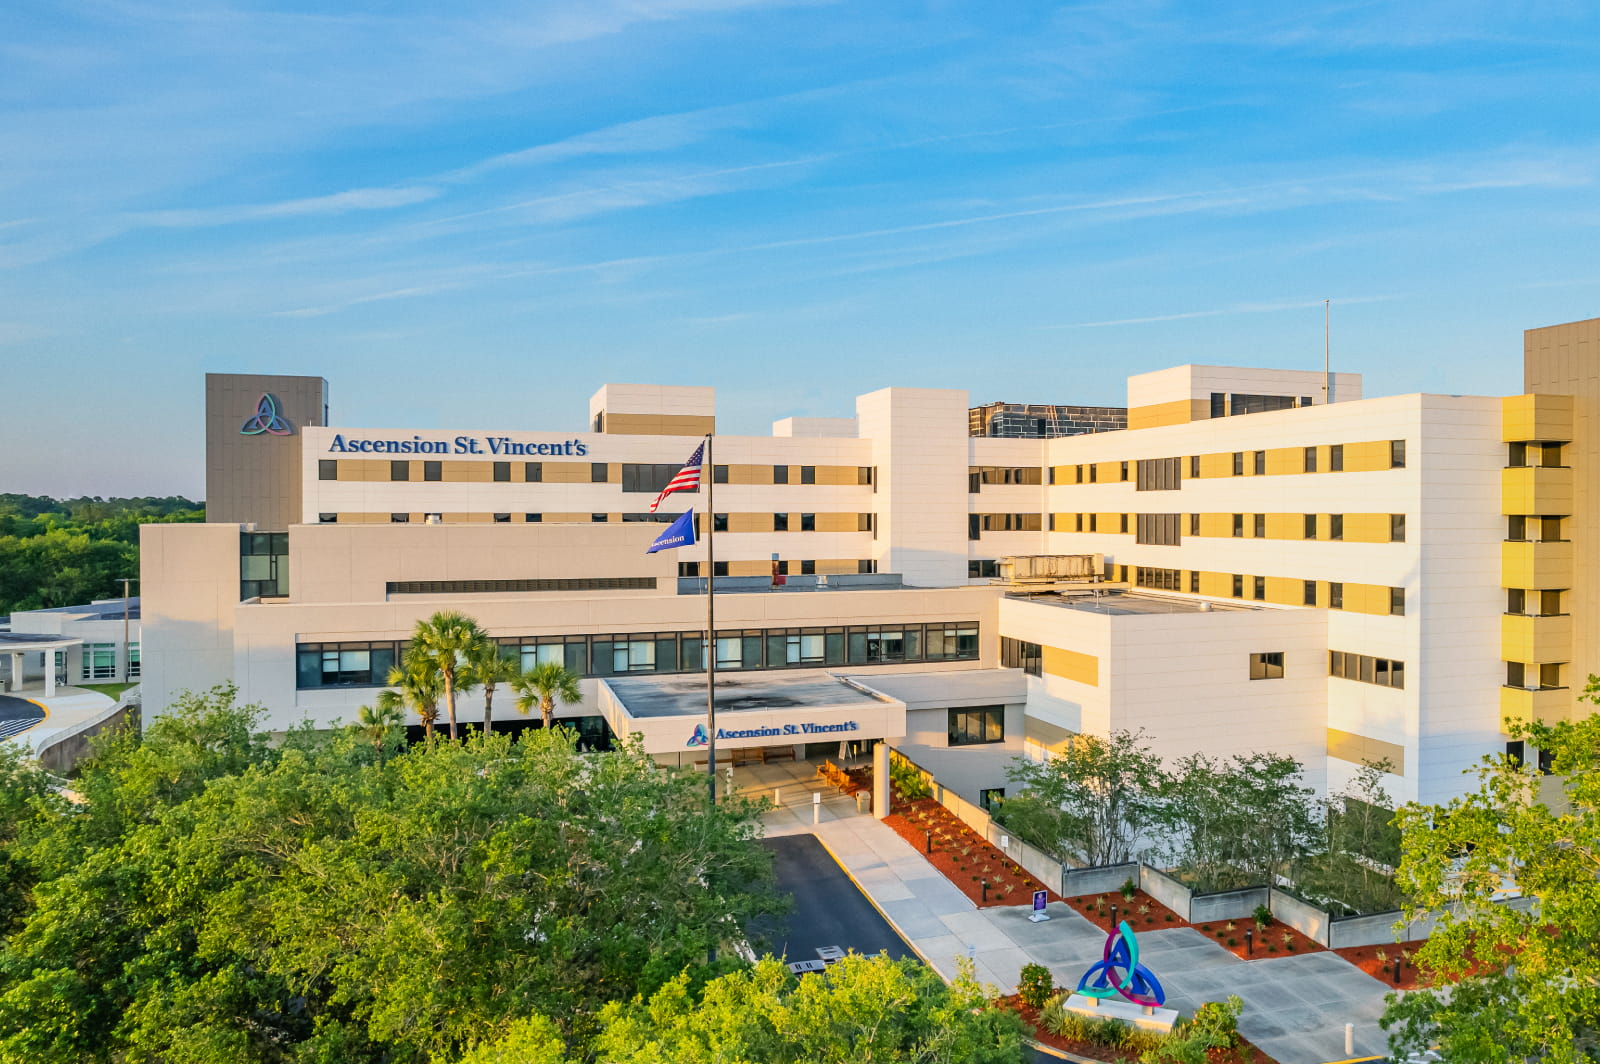 Performance Orthopedics and Spine Specialty Hospital at Ascension St. Vincent’s